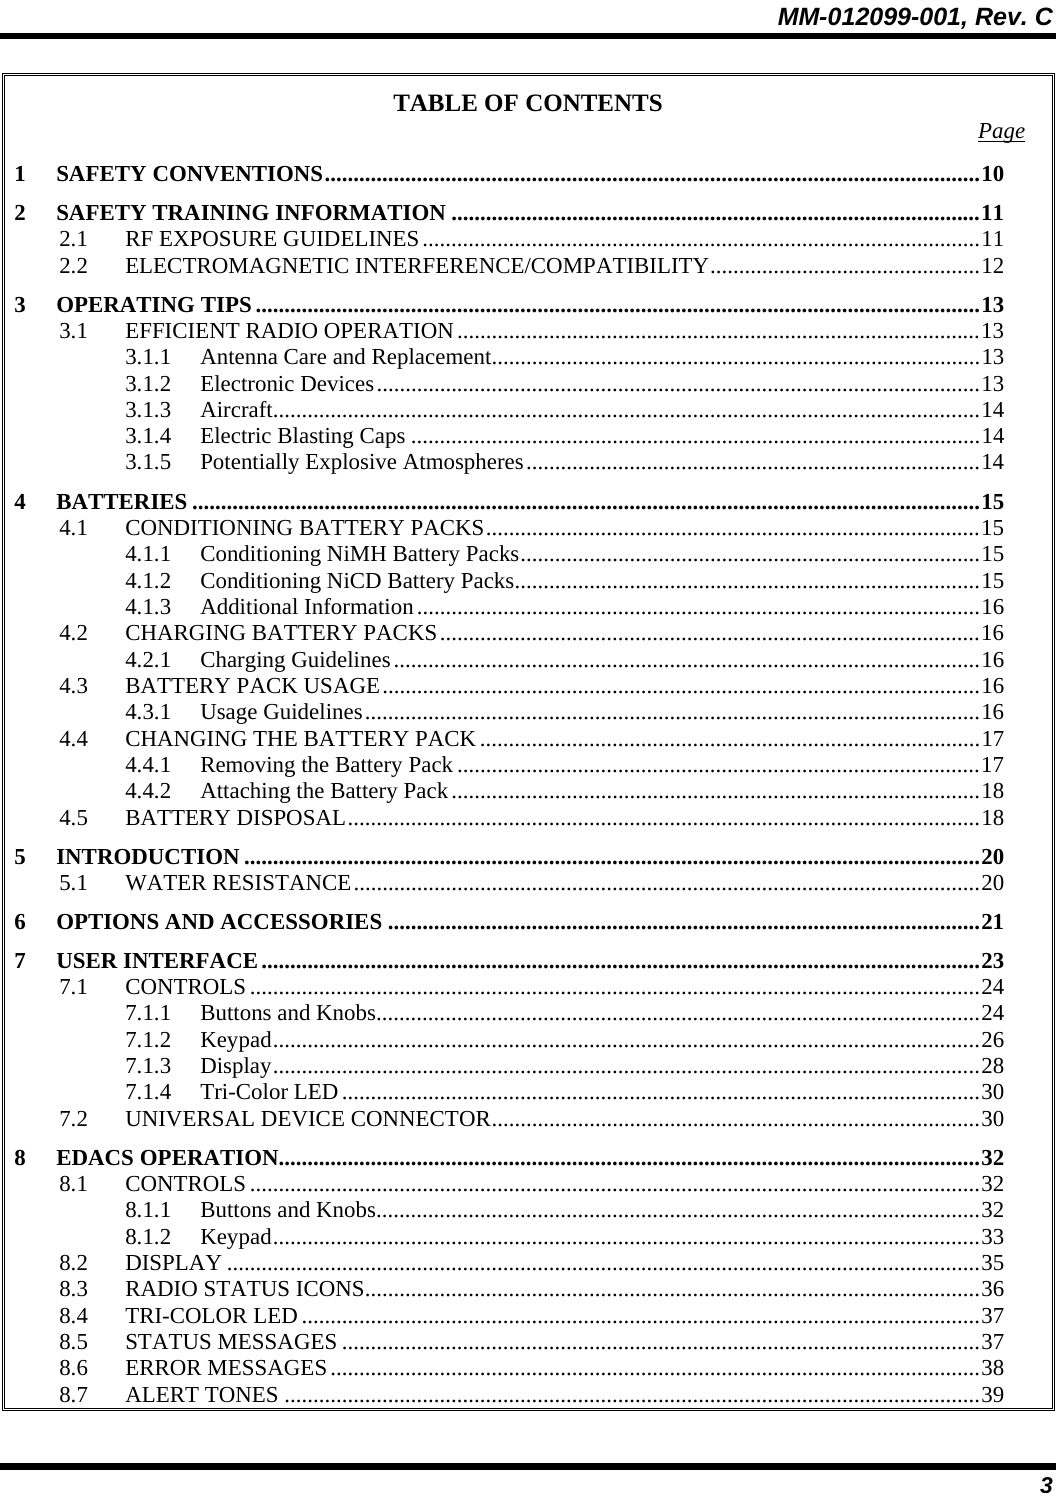 MM-012099-001, Rev. C 3 TABLE OF CONTENTS  Page 1 SAFETY CONVENTIONS..................................................................................................................10 2 SAFETY TRAINING INFORMATION ............................................................................................11 2.1 RF EXPOSURE GUIDELINES.................................................................................................11 2.2 ELECTROMAGNETIC INTERFERENCE/COMPATIBILITY...............................................12 3 OPERATING TIPS ..............................................................................................................................13 3.1 EFFICIENT RADIO OPERATION...........................................................................................13 3.1.1 Antenna Care and Replacement.....................................................................................13 3.1.2 Electronic Devices.........................................................................................................13 3.1.3 Aircraft...........................................................................................................................14 3.1.4 Electric Blasting Caps ...................................................................................................14 3.1.5 Potentially Explosive Atmospheres...............................................................................14 4 BATTERIES .........................................................................................................................................15 4.1 CONDITIONING BATTERY PACKS......................................................................................15 4.1.1 Conditioning NiMH Battery Packs................................................................................15 4.1.2 Conditioning NiCD Battery Packs.................................................................................15 4.1.3 Additional Information..................................................................................................16 4.2 CHARGING BATTERY PACKS..............................................................................................16 4.2.1 Charging Guidelines......................................................................................................16 4.3 BATTERY PACK USAGE........................................................................................................16 4.3.1 Usage Guidelines...........................................................................................................16 4.4 CHANGING THE BATTERY PACK .......................................................................................17 4.4.1 Removing the Battery Pack ...........................................................................................17 4.4.2 Attaching the Battery Pack............................................................................................18 4.5 BATTERY DISPOSAL..............................................................................................................18 5 INTRODUCTION ................................................................................................................................20 5.1 WATER RESISTANCE.............................................................................................................20 6 OPTIONS AND ACCESSORIES .......................................................................................................21 7 USER INTERFACE.............................................................................................................................23 7.1 CONTROLS...............................................................................................................................24 7.1.1 Buttons and Knobs.........................................................................................................24 7.1.2 Keypad...........................................................................................................................26 7.1.3 Display...........................................................................................................................28 7.1.4 Tri-Color LED...............................................................................................................30 7.2 UNIVERSAL DEVICE CONNECTOR.....................................................................................30 8 EDACS OPERATION..........................................................................................................................32 8.1 CONTROLS...............................................................................................................................32 8.1.1 Buttons and Knobs.........................................................................................................32 8.1.2 Keypad...........................................................................................................................33 8.2 DISPLAY ...................................................................................................................................35 8.3 RADIO STATUS ICONS...........................................................................................................36 8.4 TRI-COLOR LED......................................................................................................................37 8.5 STATUS MESSAGES ...............................................................................................................37 8.6 ERROR MESSAGES.................................................................................................................38 8.7 ALERT TONES .........................................................................................................................39 